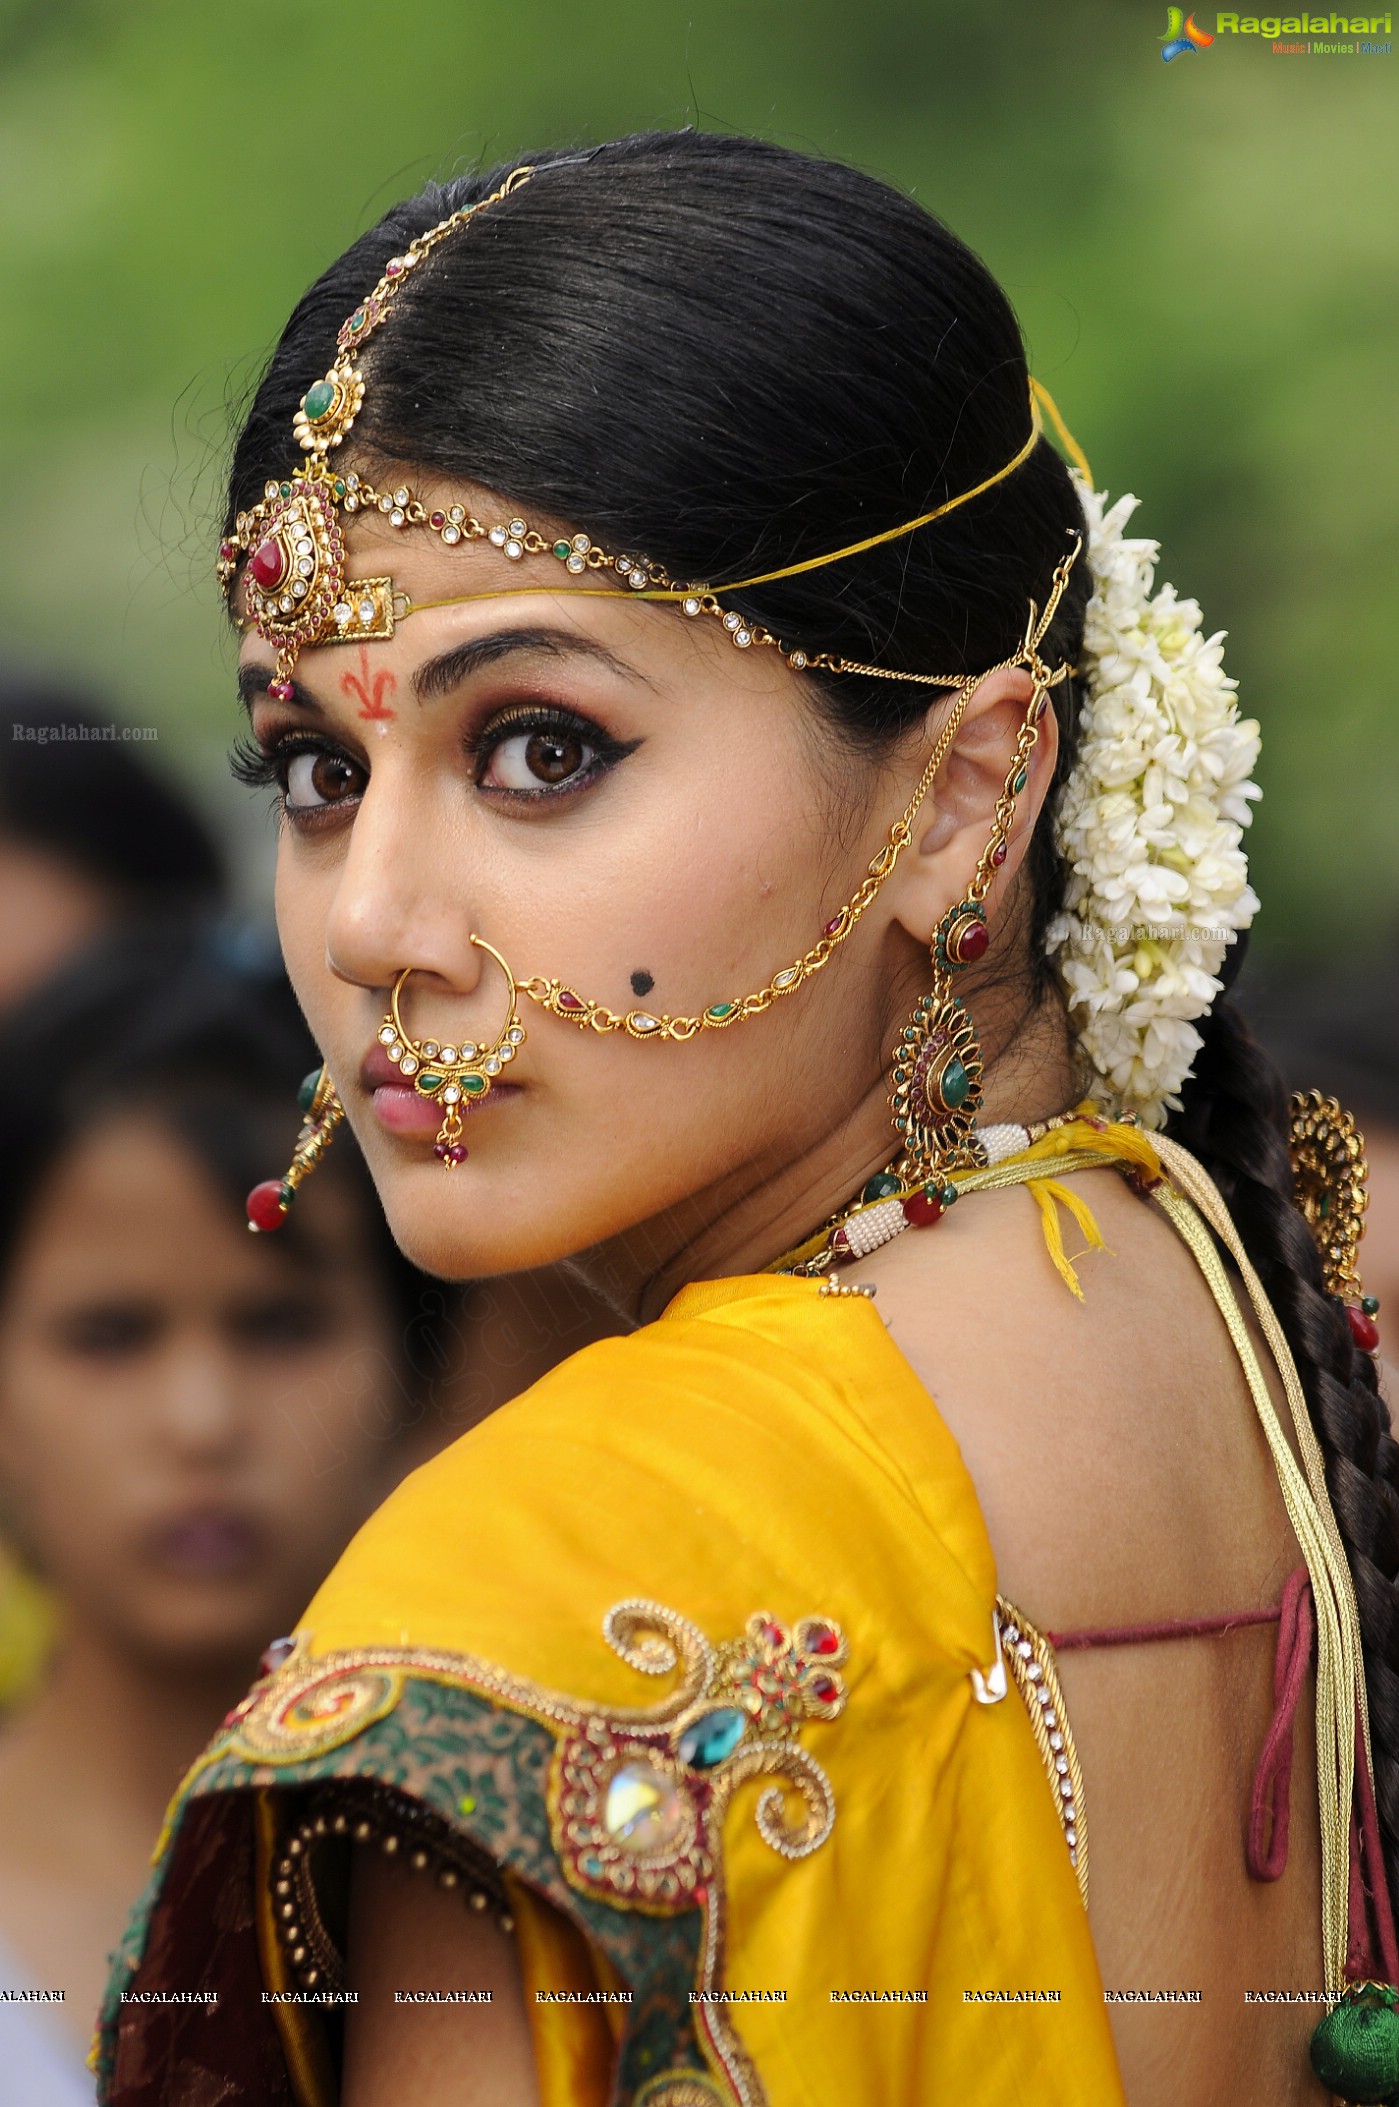 Taapsee (Posters)